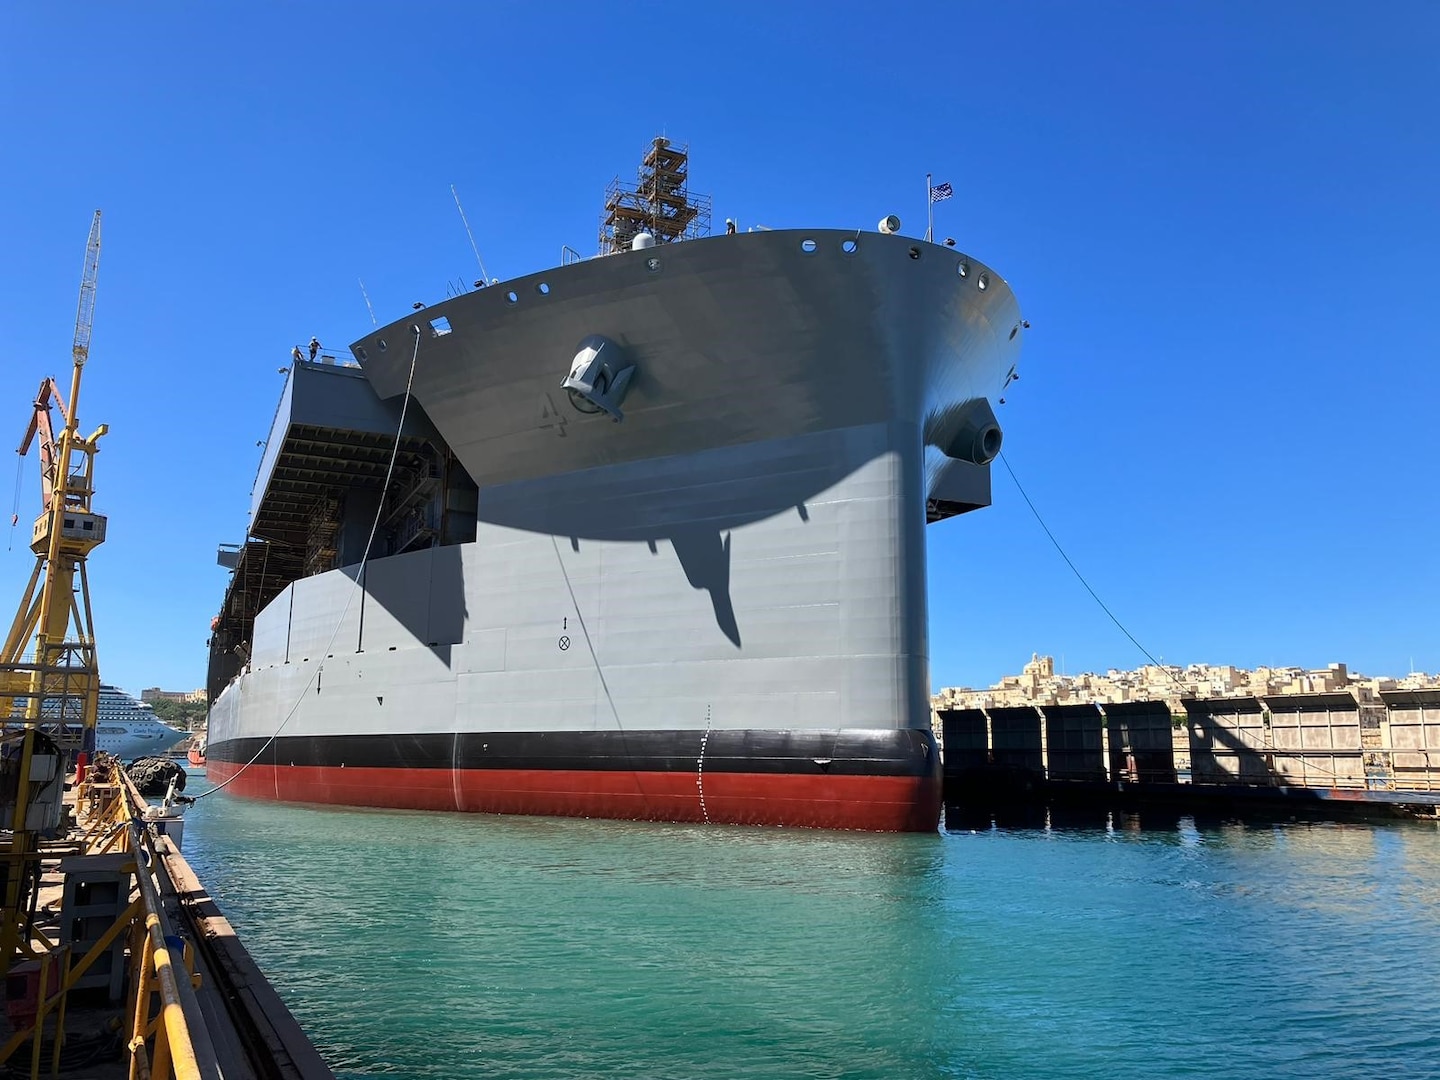 VALLETTA, Malta – The Lewis B. Puller-class expeditionary sea base USS Hershel “Woody” Williams (ESB 4) undocks during its first Regular Overhaul (ROH), a planned maintenance period, in the European area of operations at Palumbo Shipyard Malta. ROHs are routine, planned maintenance periods providing necessary repairs, maintenance and modernization for the ship to operate at full technical capacity and mission capability for its entire designed service life. (U.S. Navy photo)